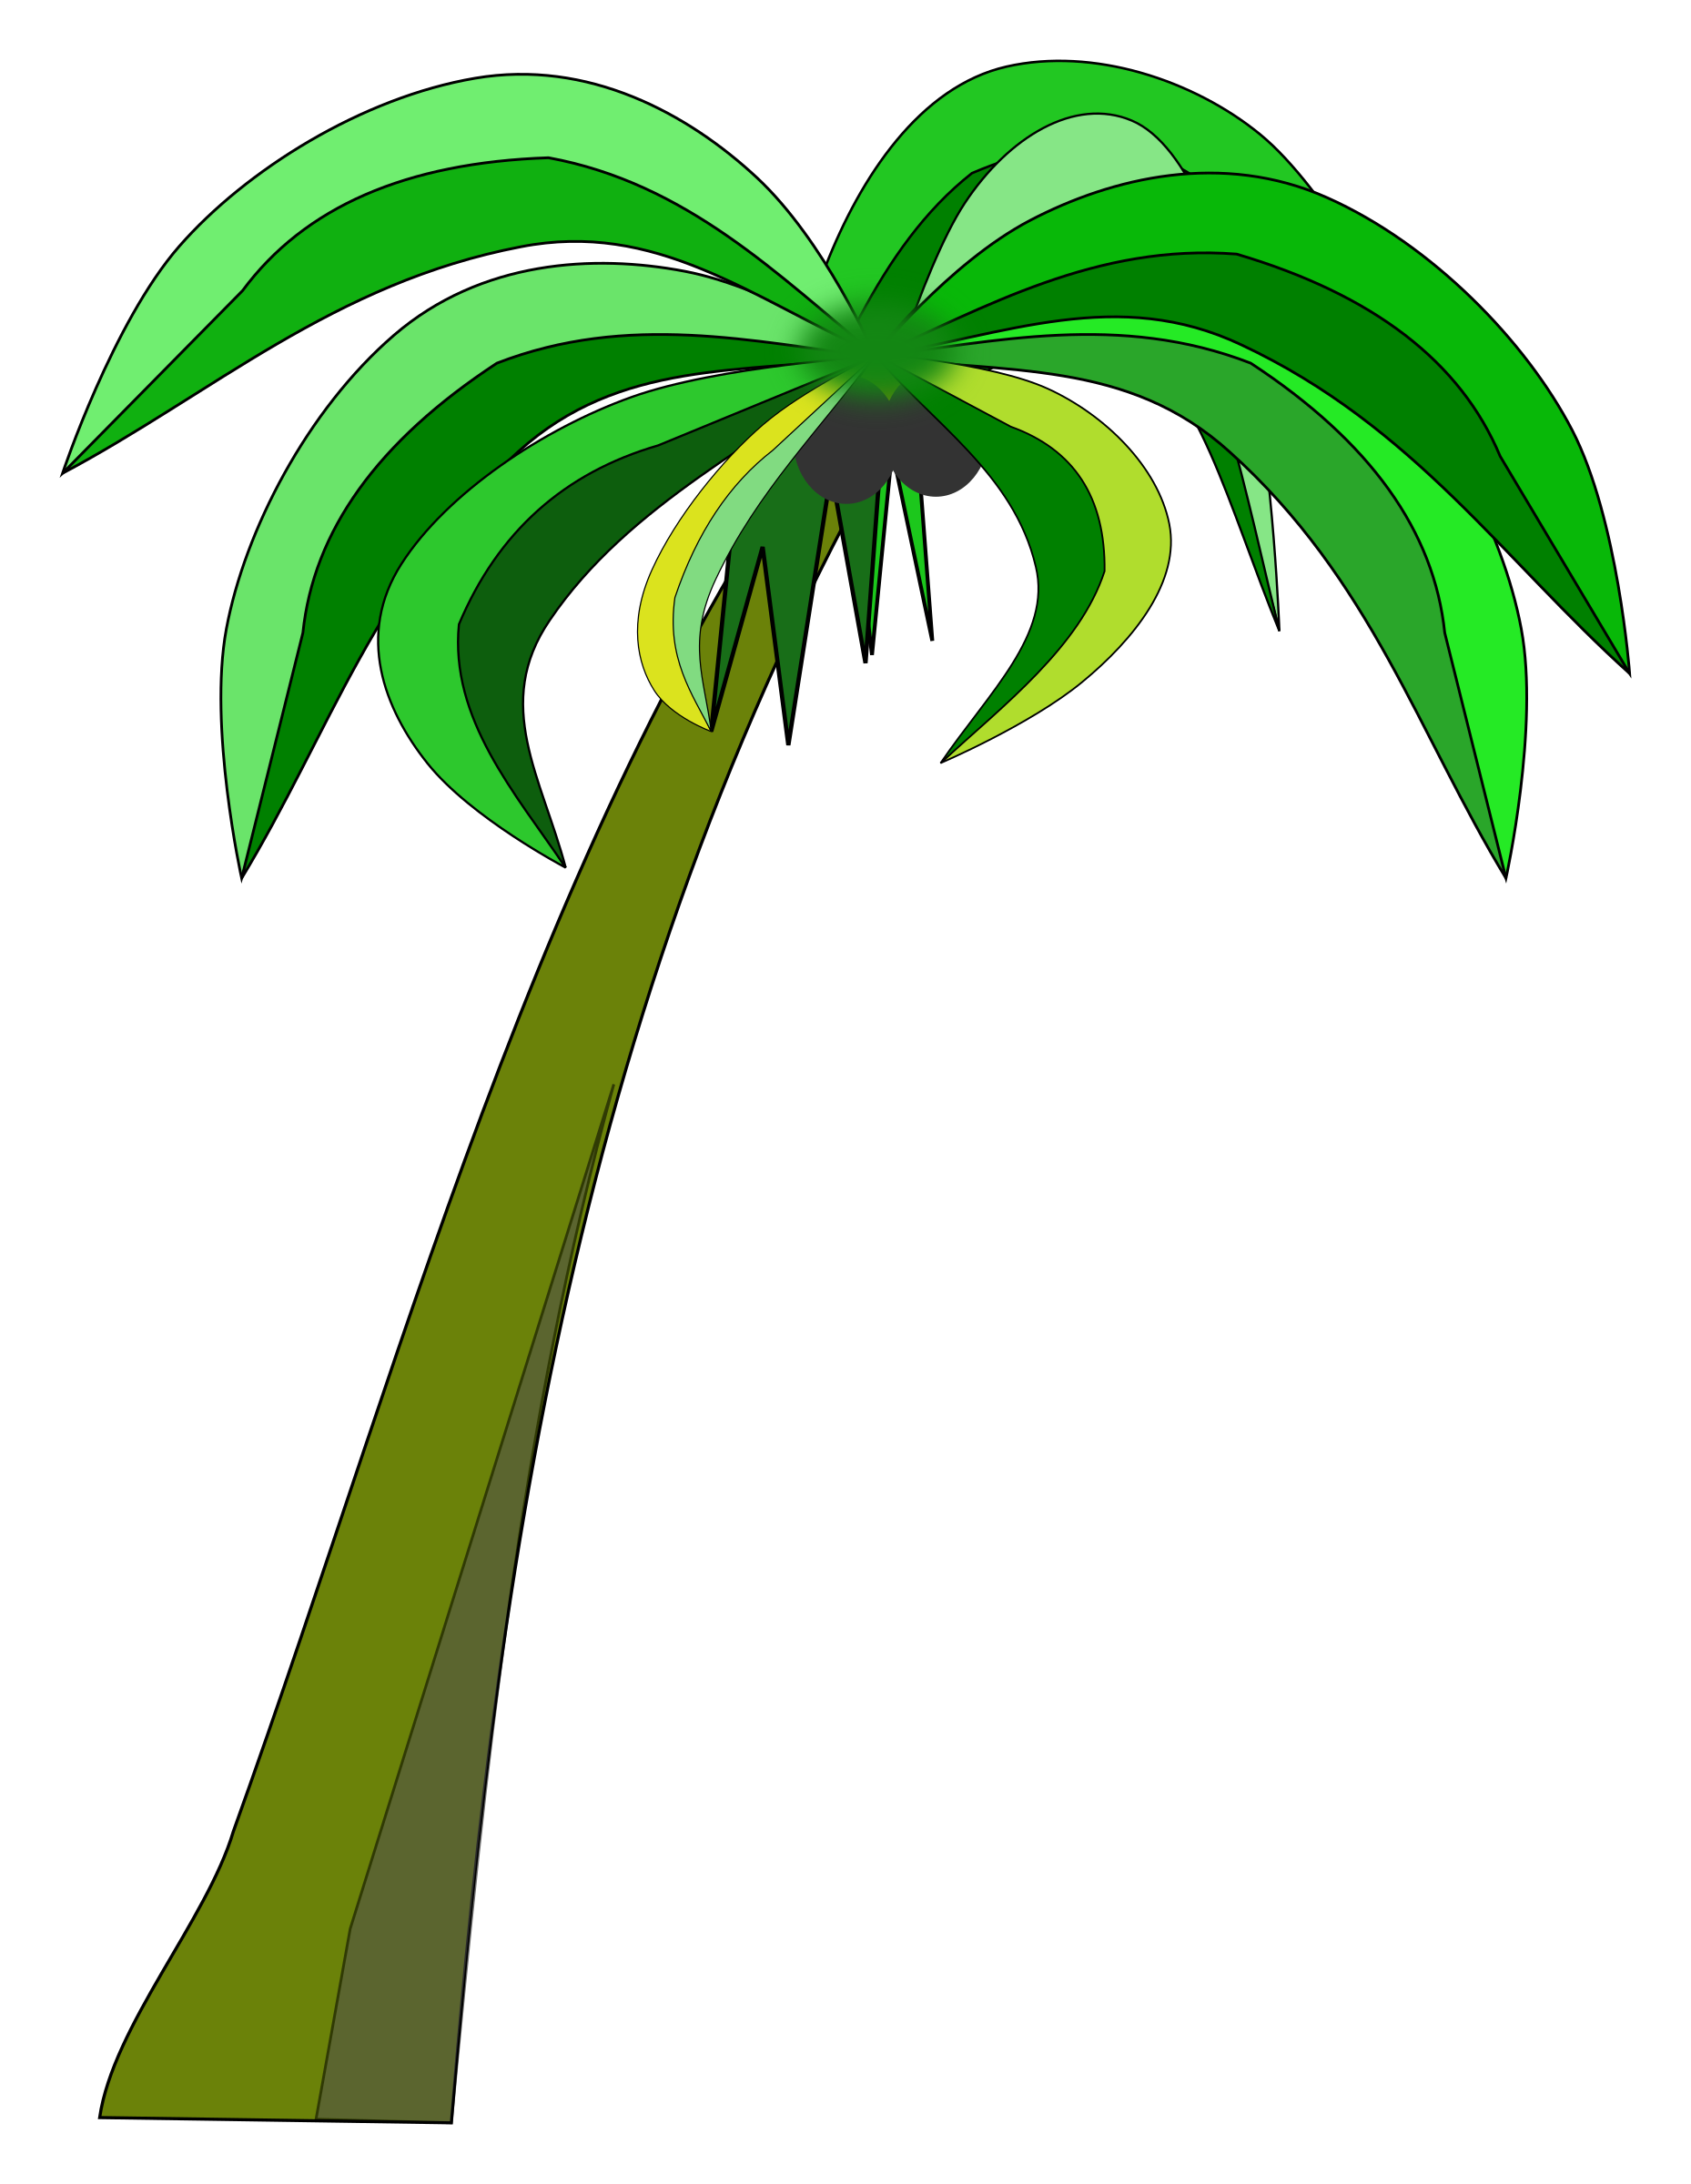 Coconut clipart branch. Palm or tree big